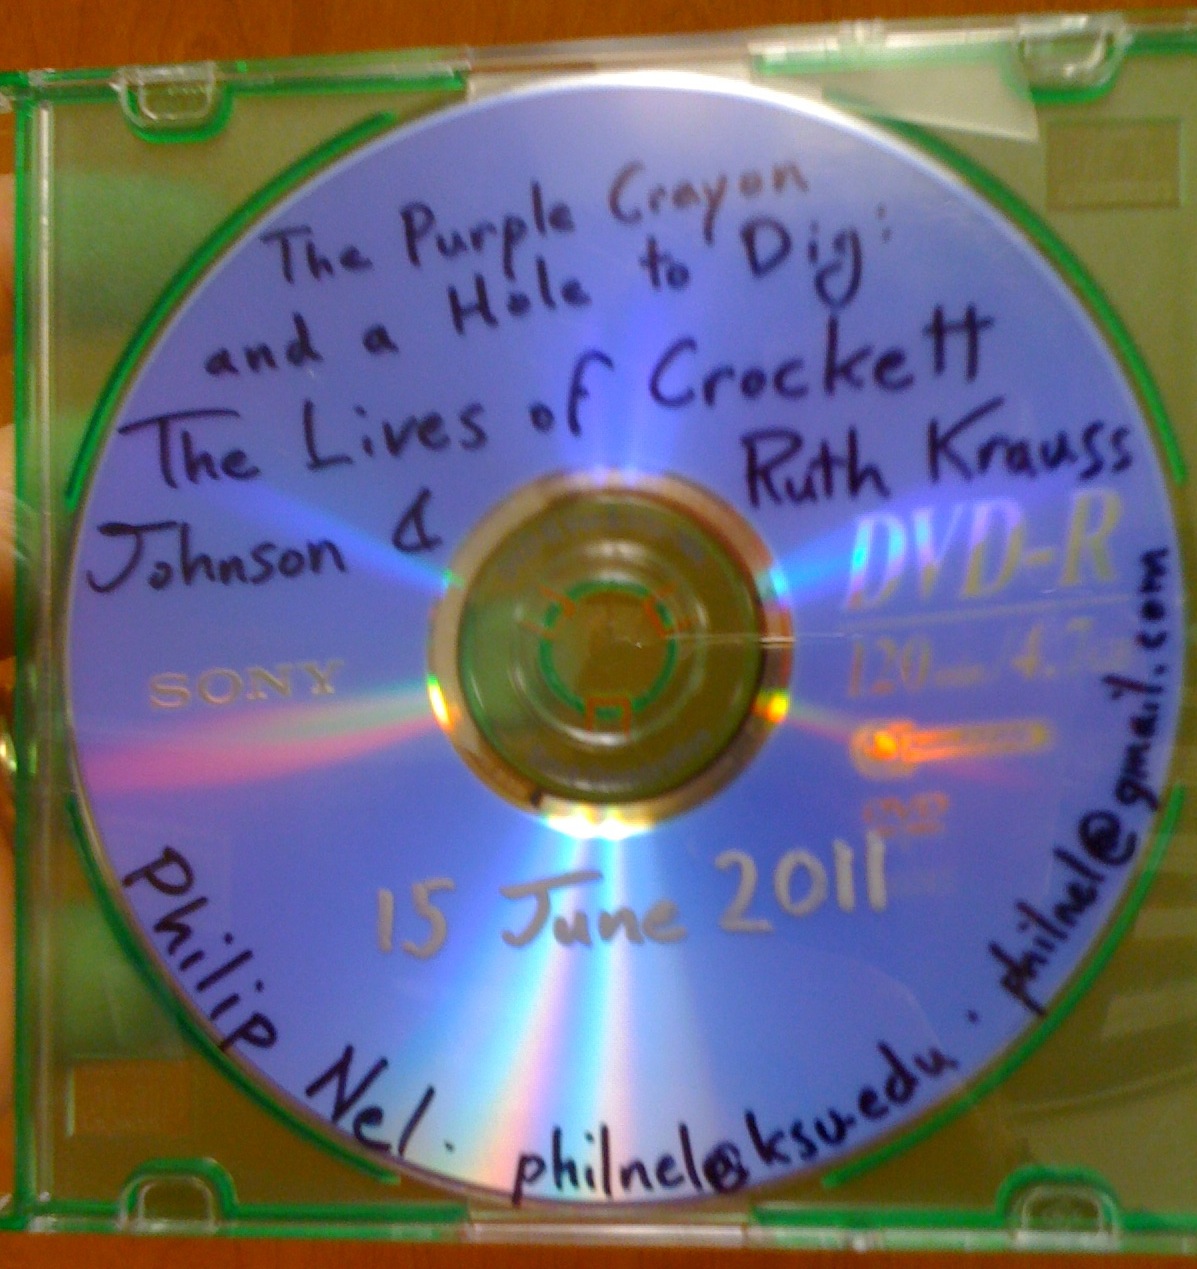 The Purple Crayon and a Hole to Dig: The Lives of Crockett Johnson and Ruth Krauss -- DVD featuring manuscript and all images